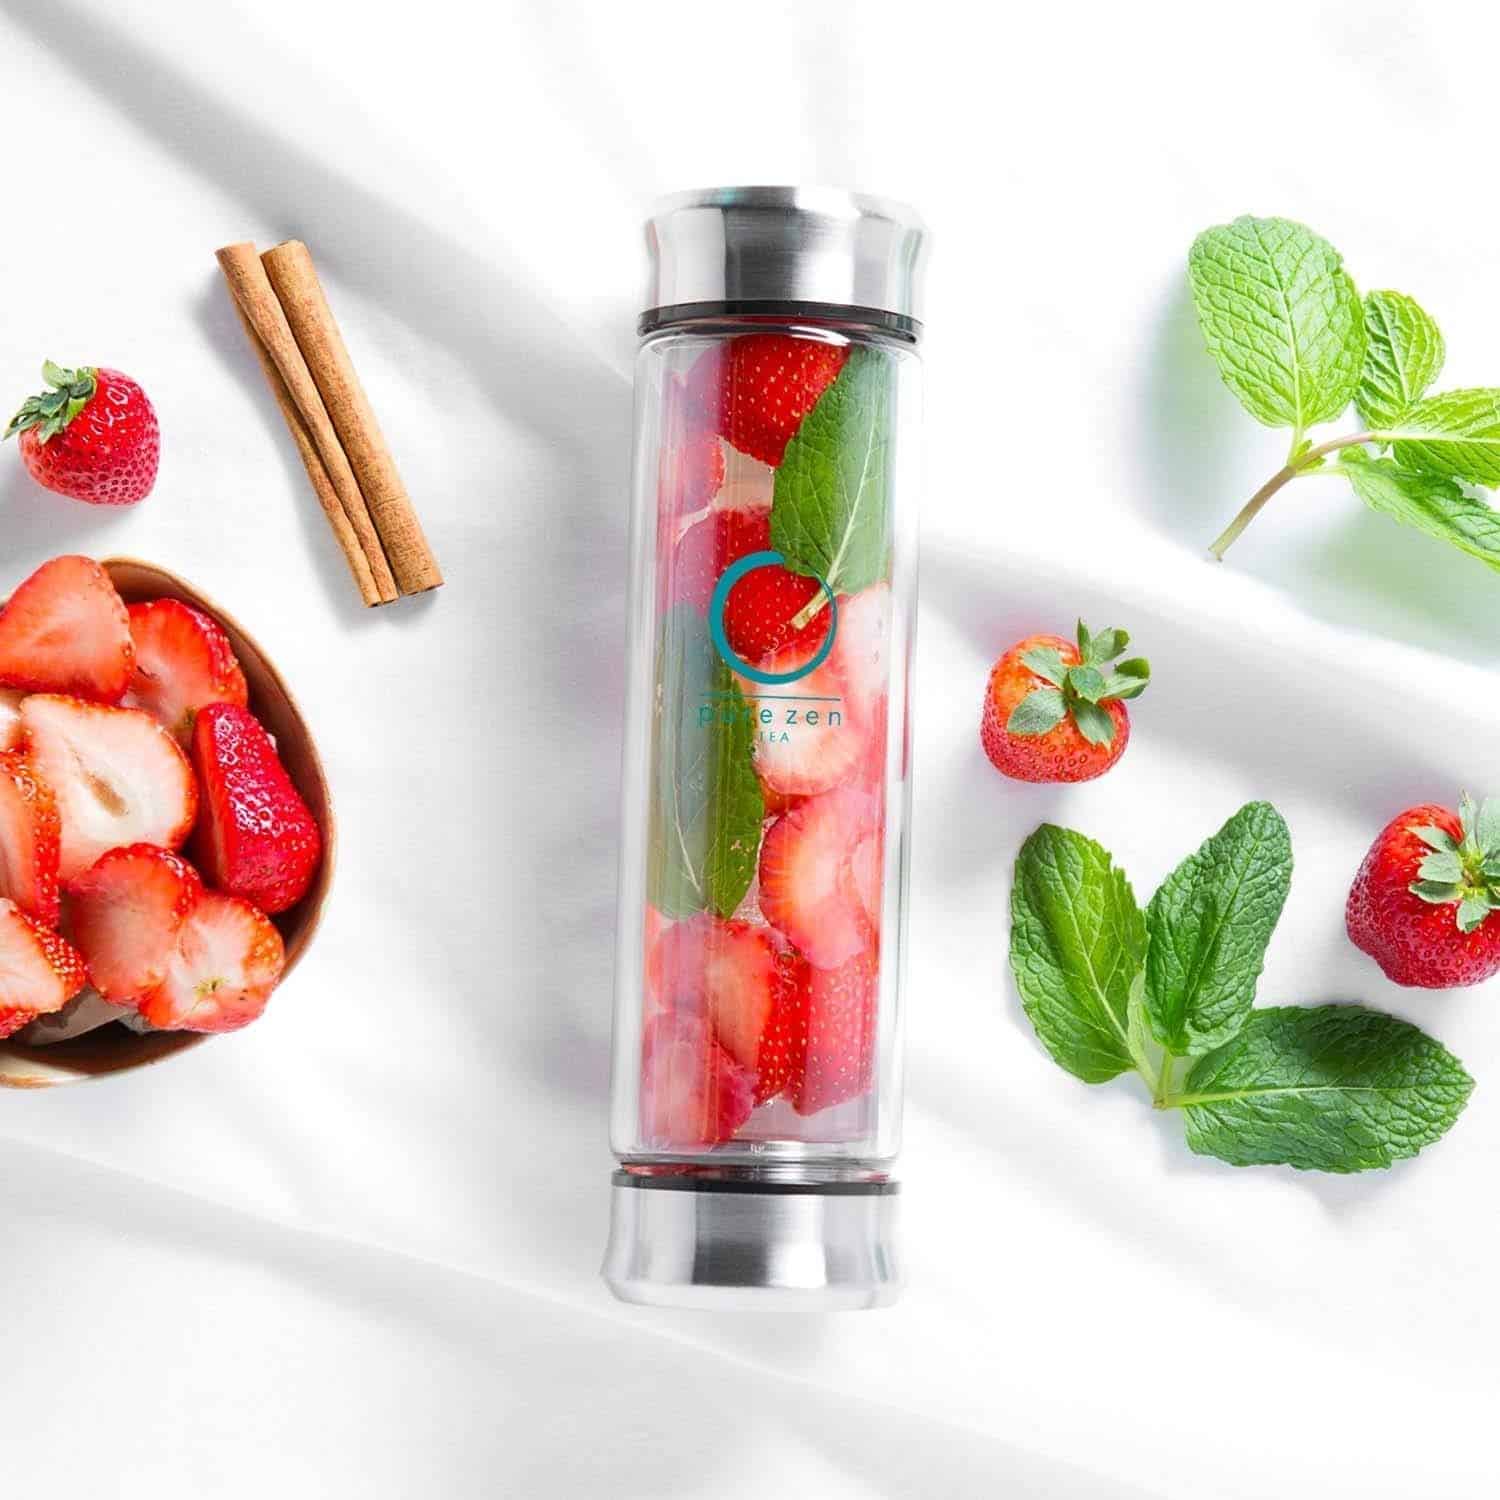 Pure Zen Tea Thermos with Infuser - Stainless Steel Insulated Tea Infuser  Tumbler for Loose Leaf Tea, Iced Coffee and Fruit-Infused Water - Leakproof